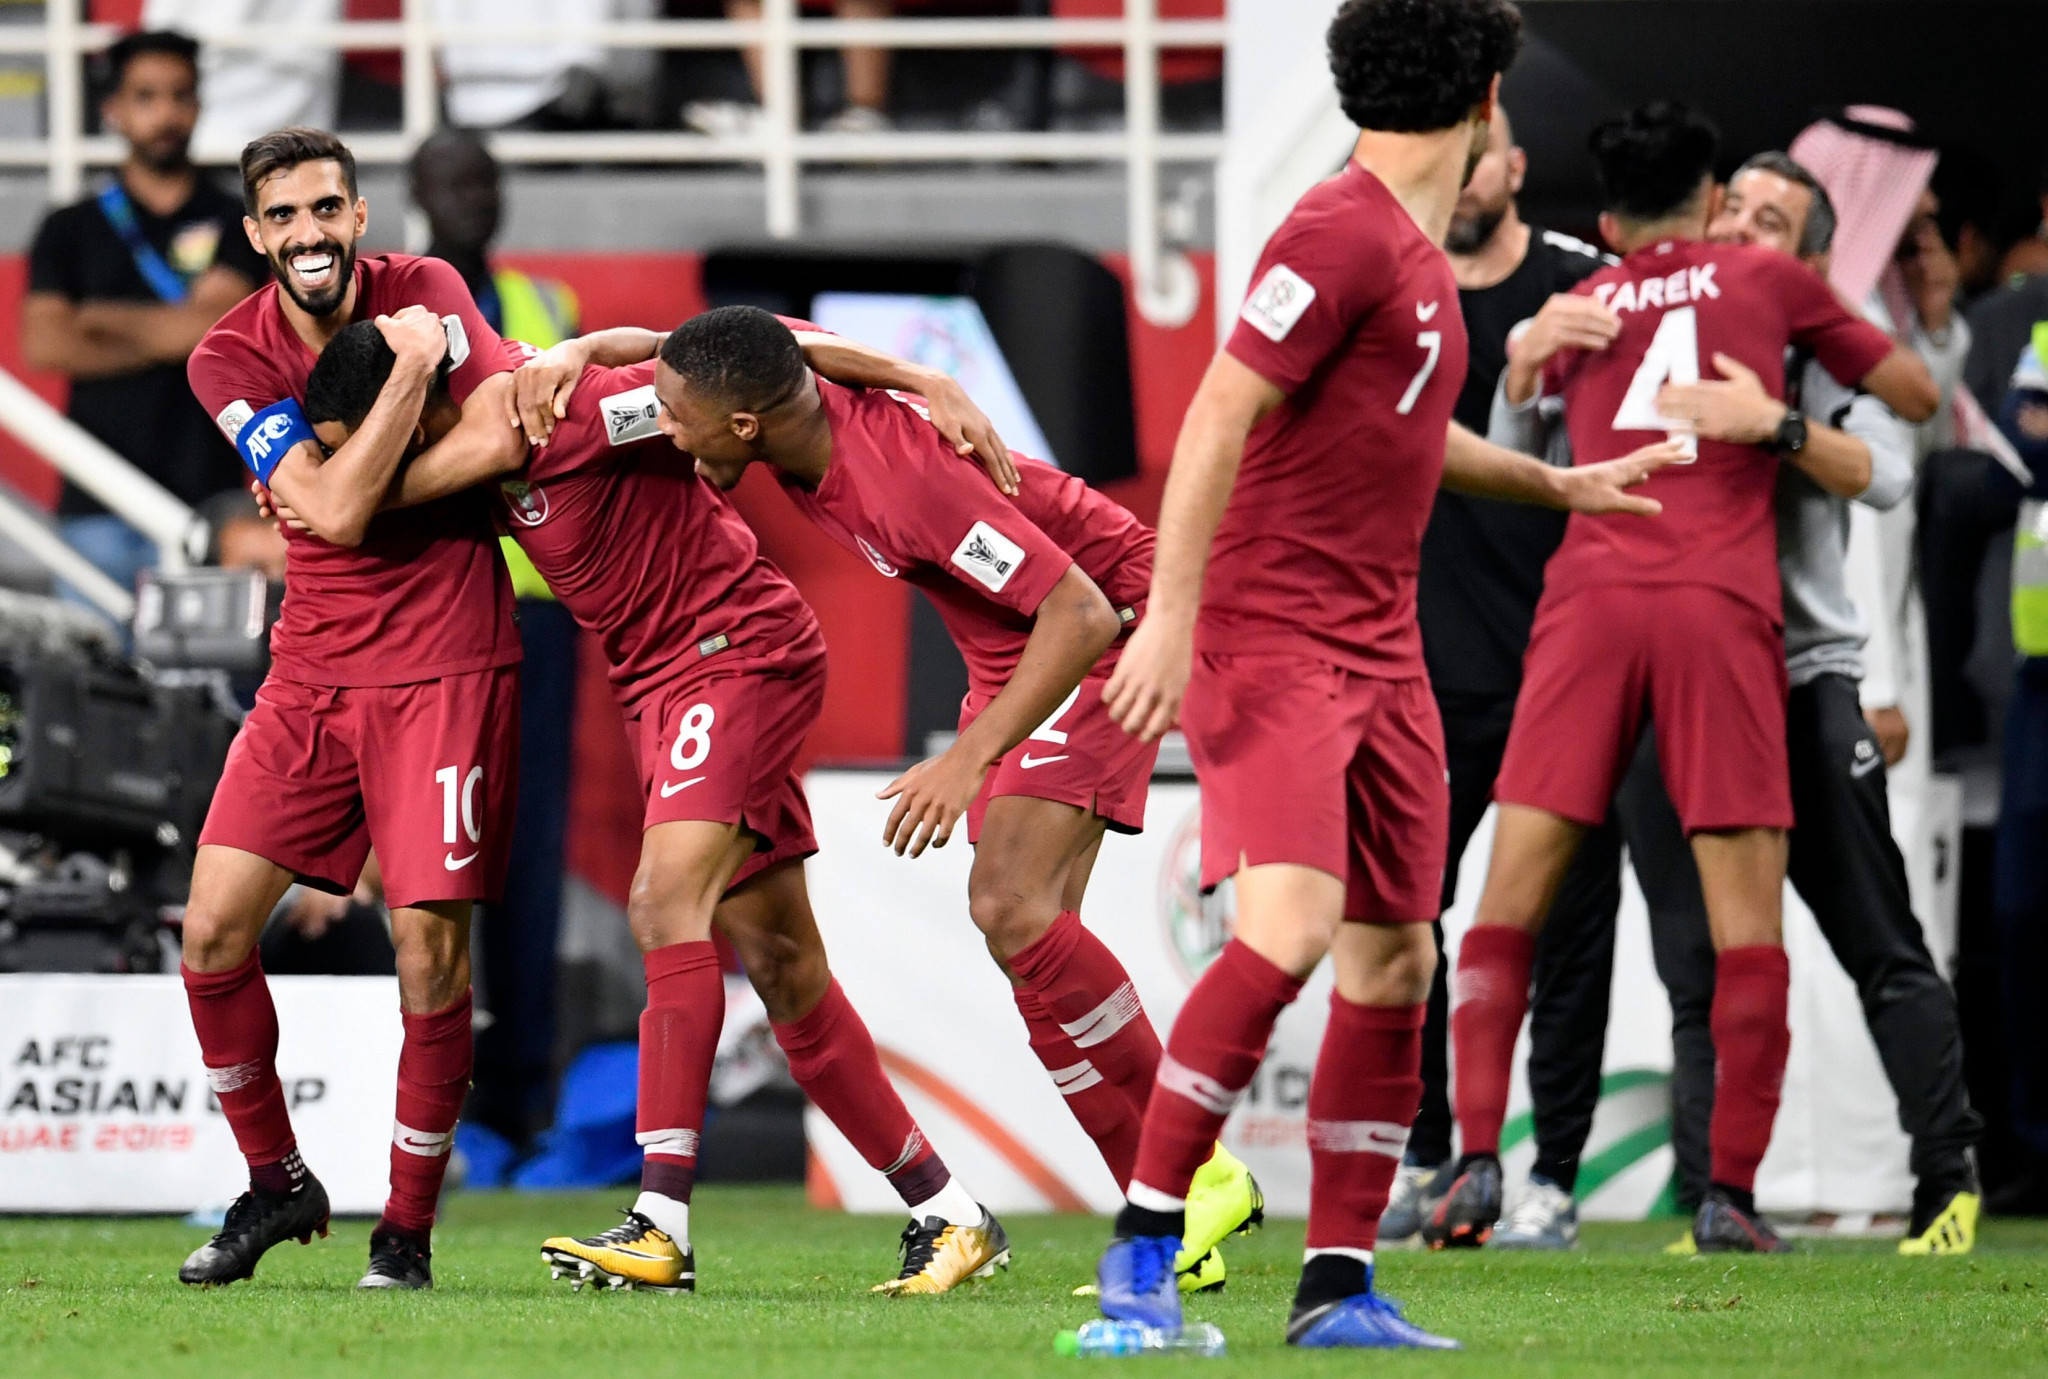 Qatar thrashed hosts United Arab Emirates 4-0 to book their place in the final of the Asian Football Confederation Asian Cup ©Getty Images